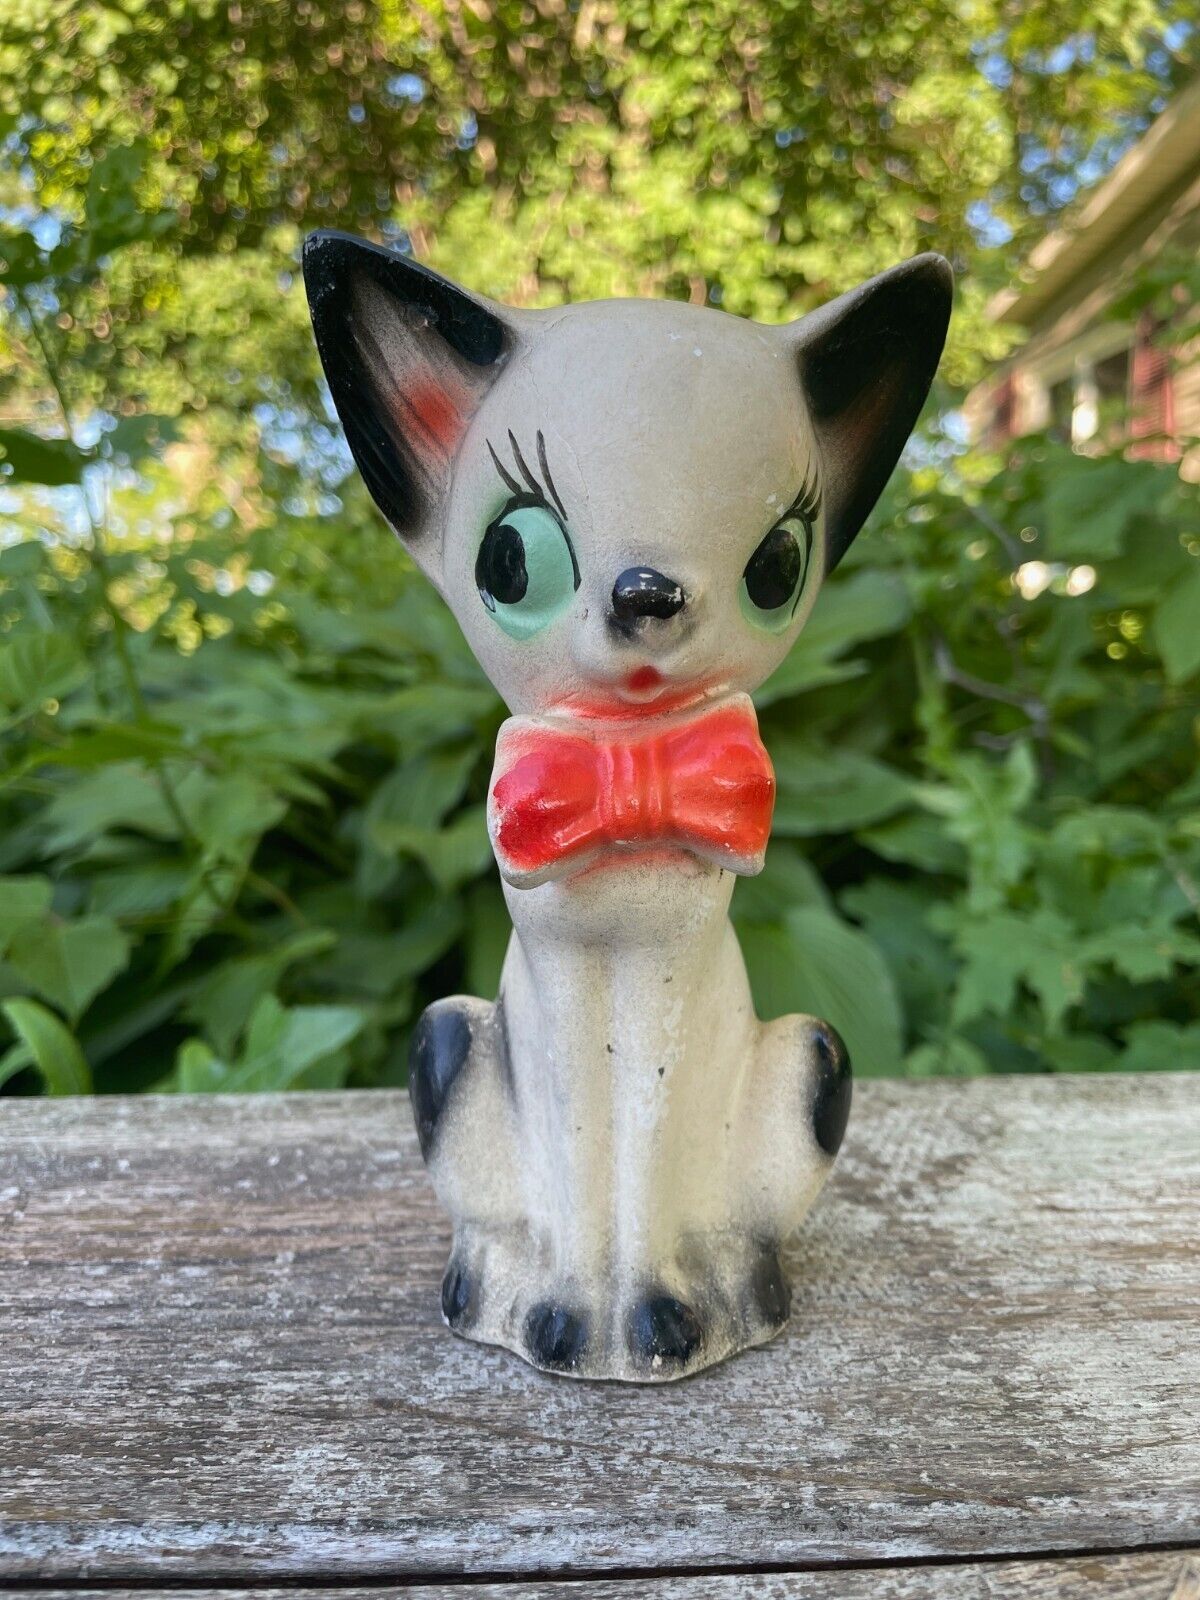 Vintage Chalkware - Shifty-Eyed Cat Wearing a Red Bow Tie and Grinning